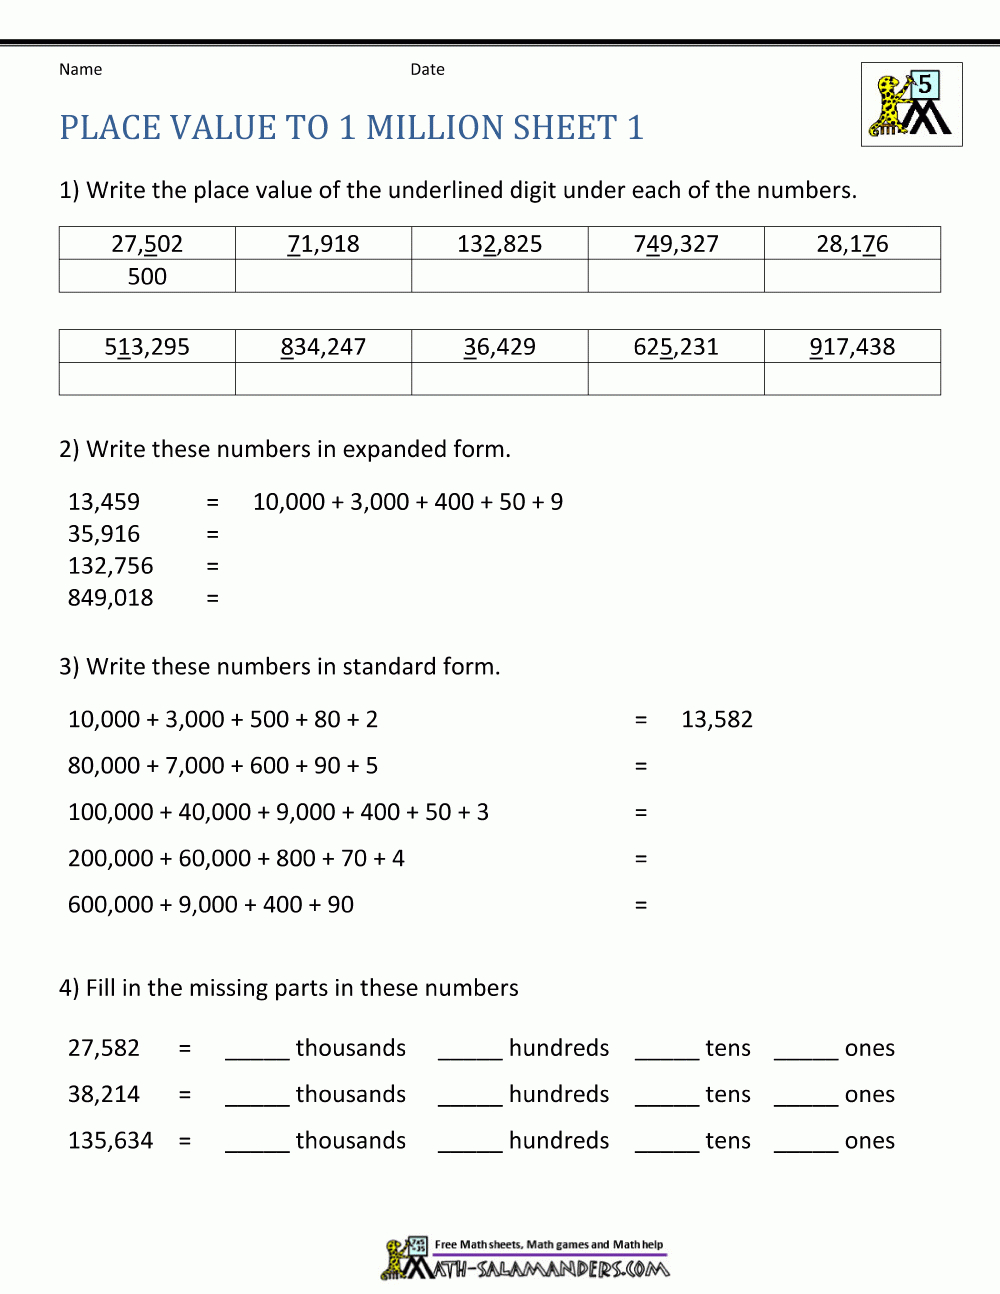 Place Value Worksheet - Up To 10 Million | Place Value